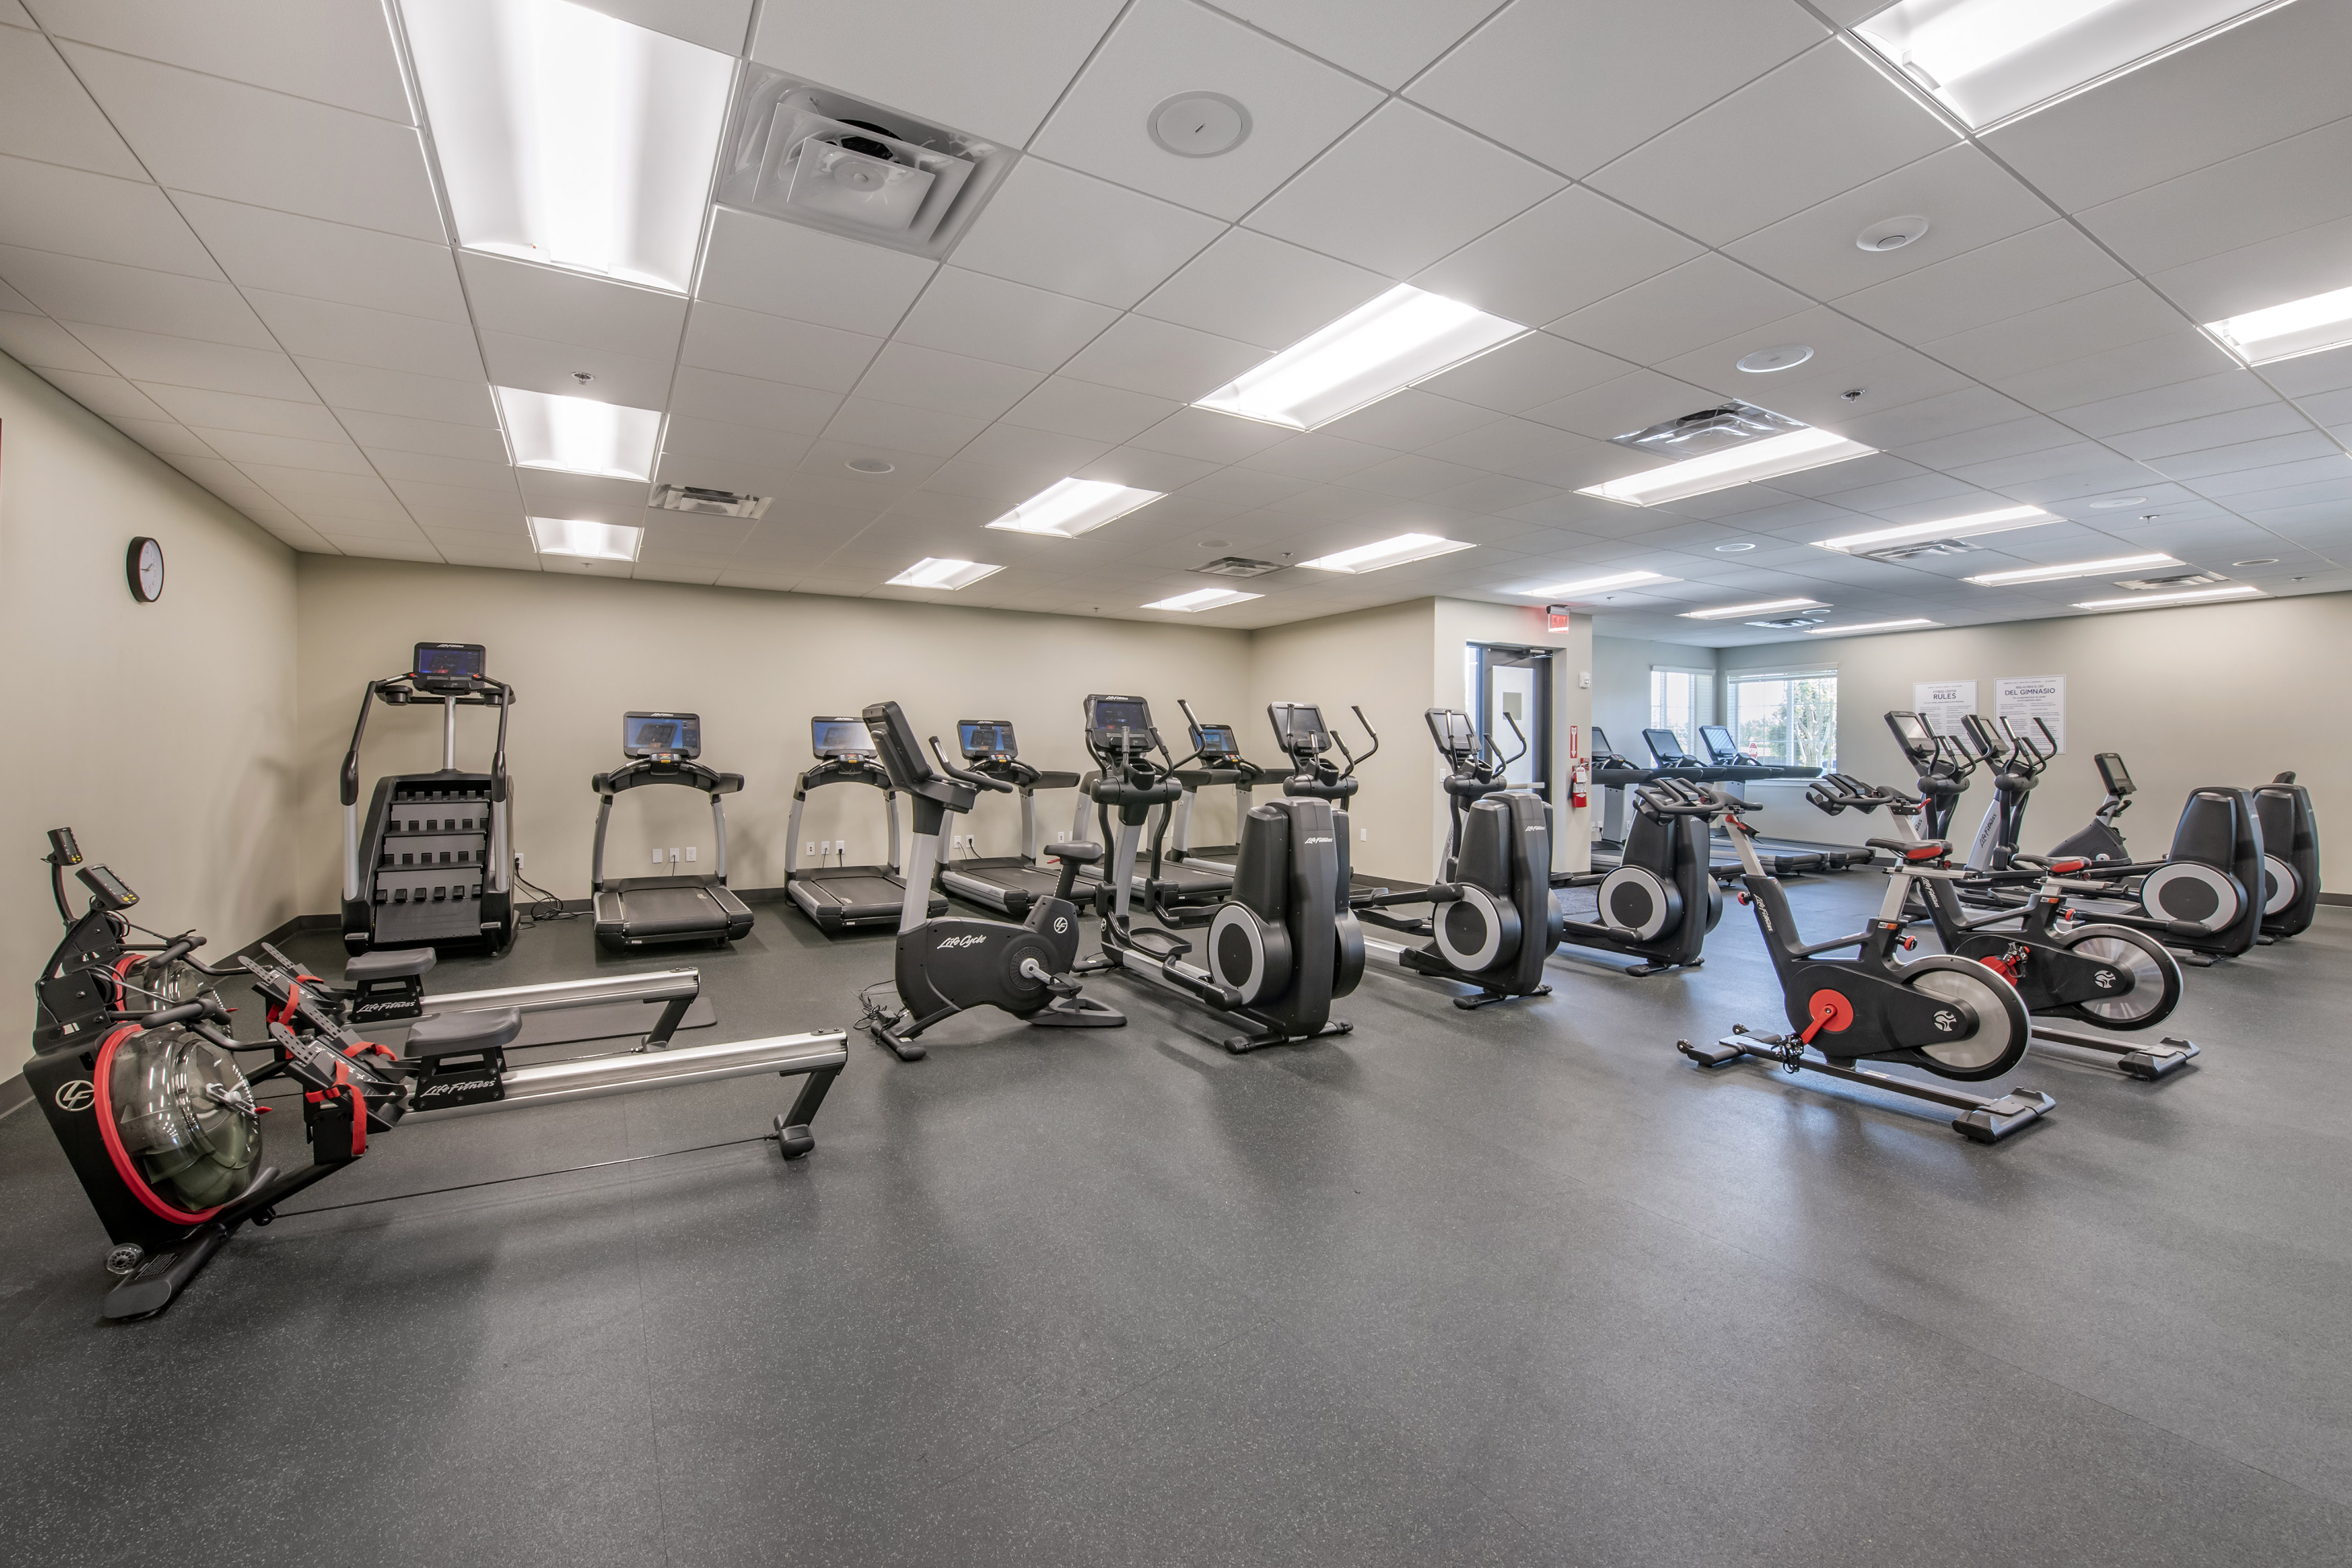 Fitness Center with Bikes and running machines